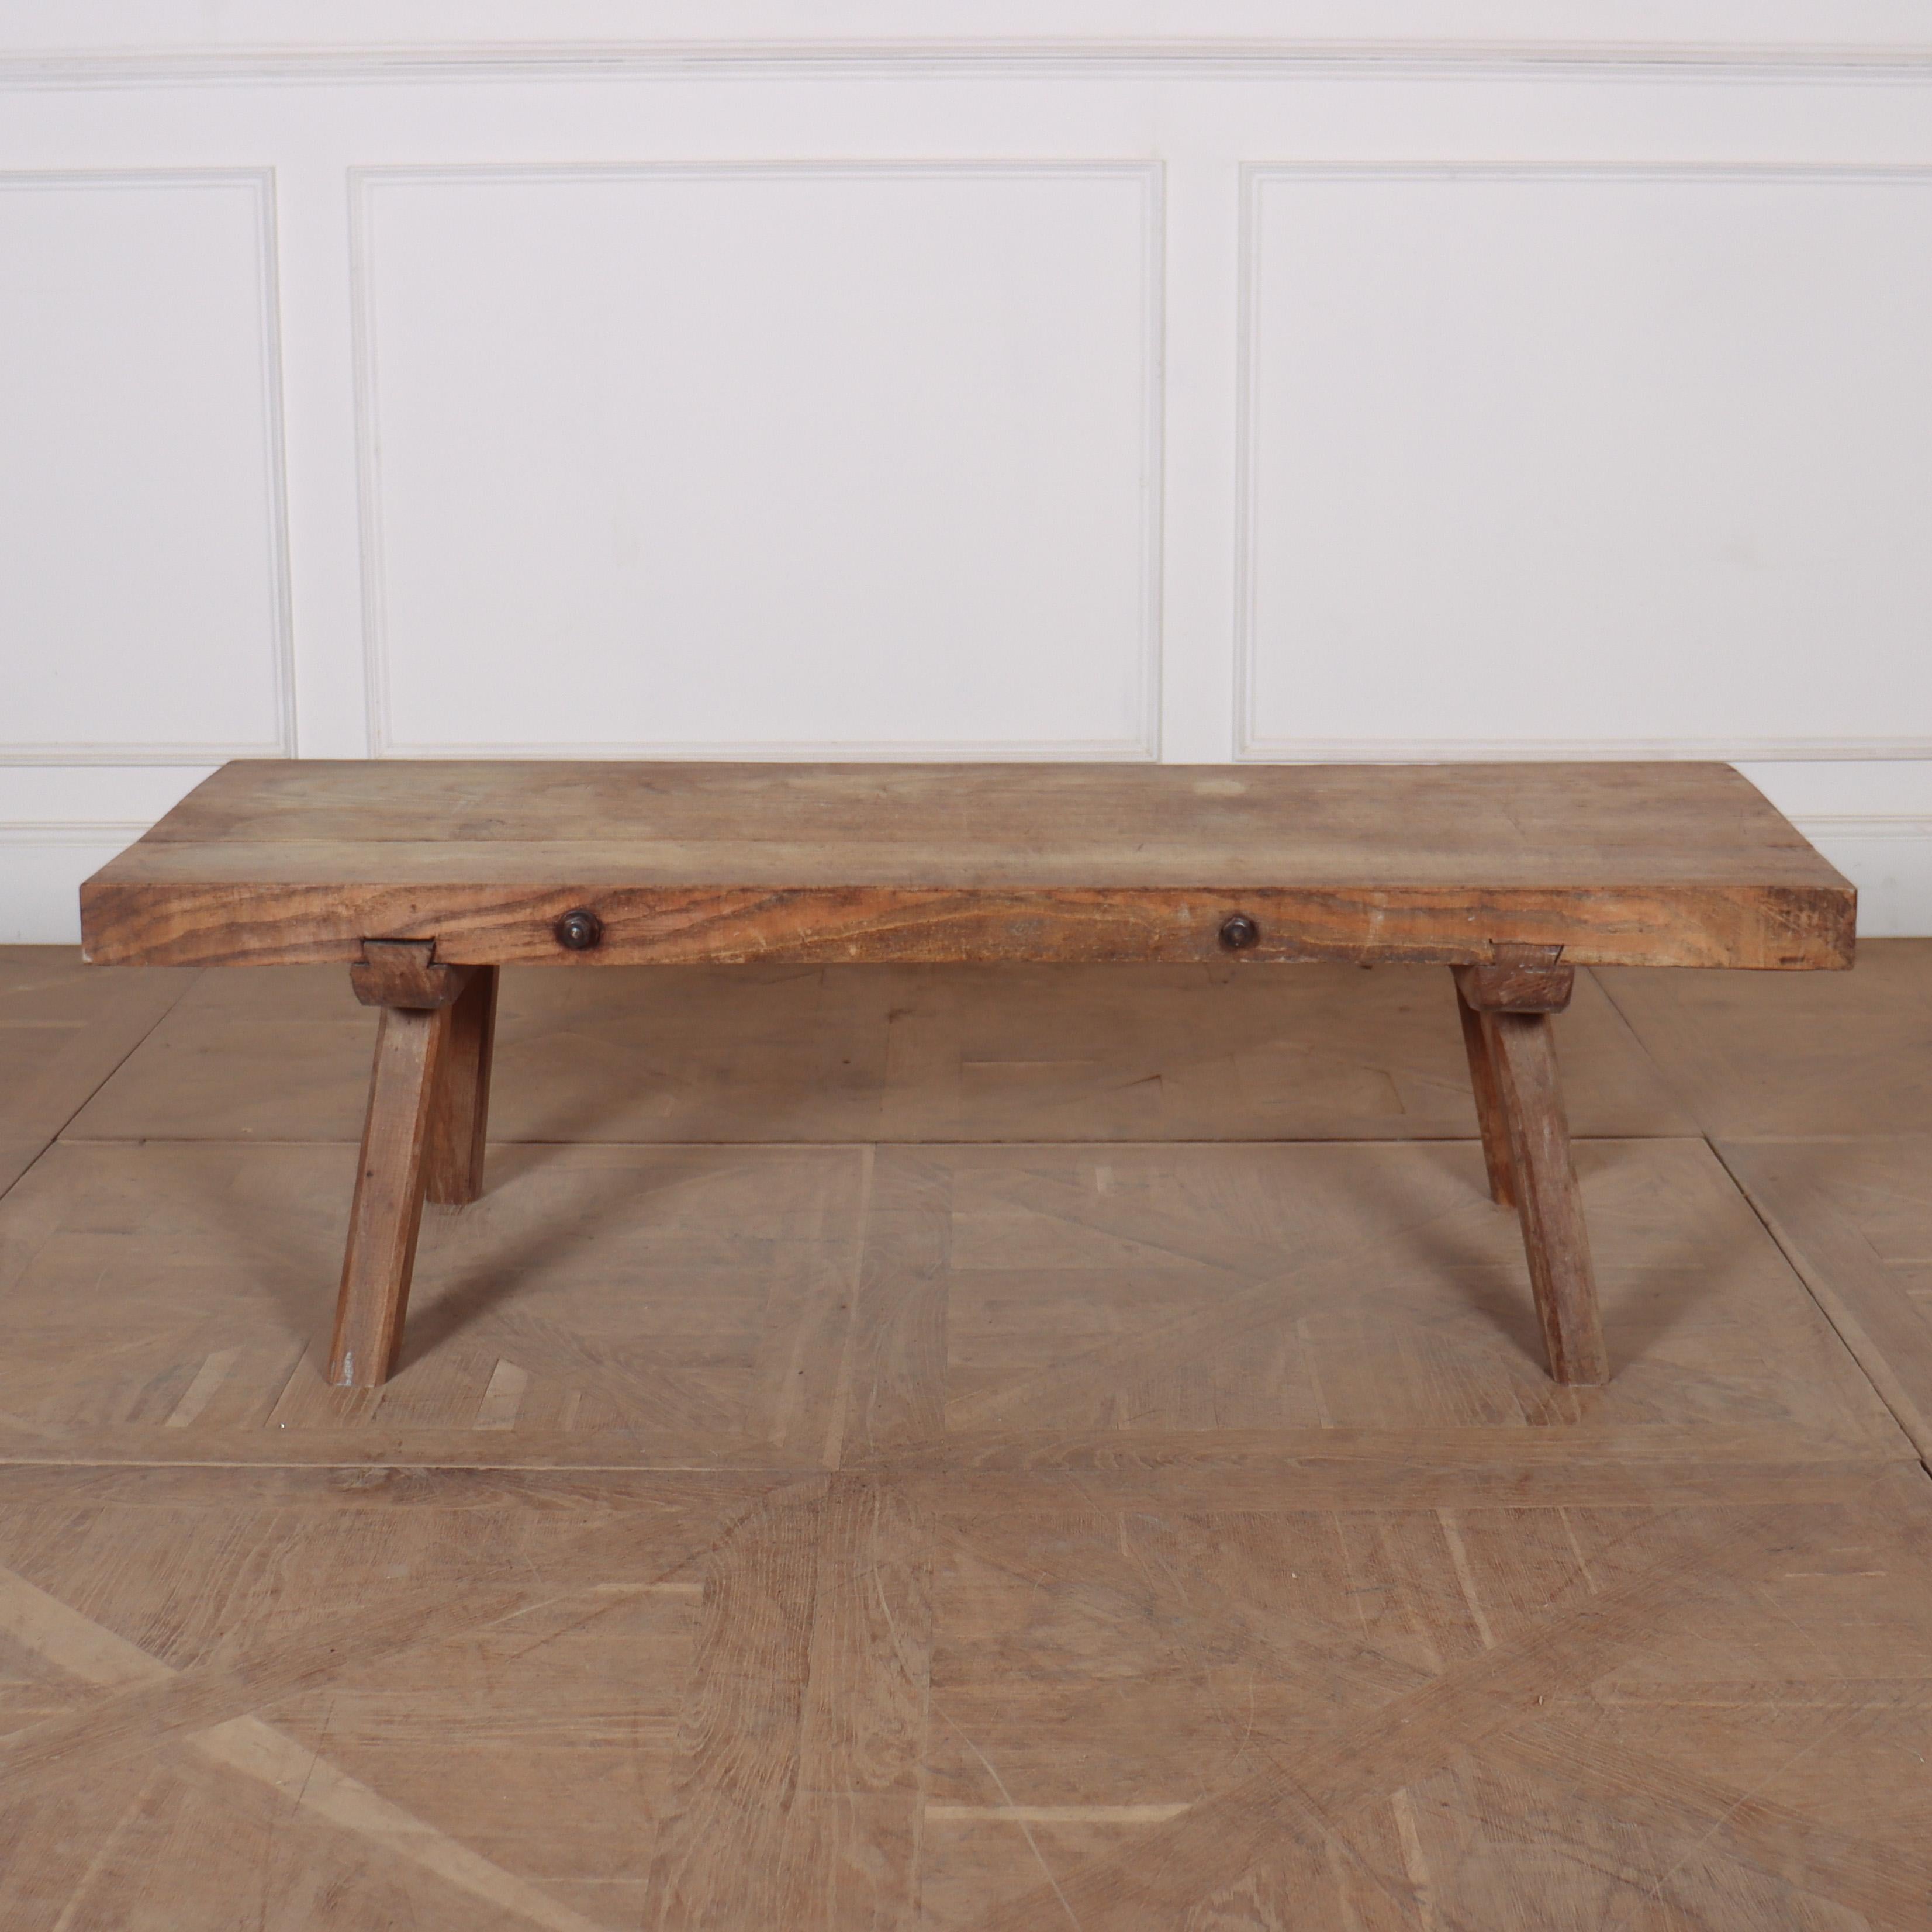 Primitive Oak Coffee Table In Good Condition For Sale In Leamington Spa, Warwickshire